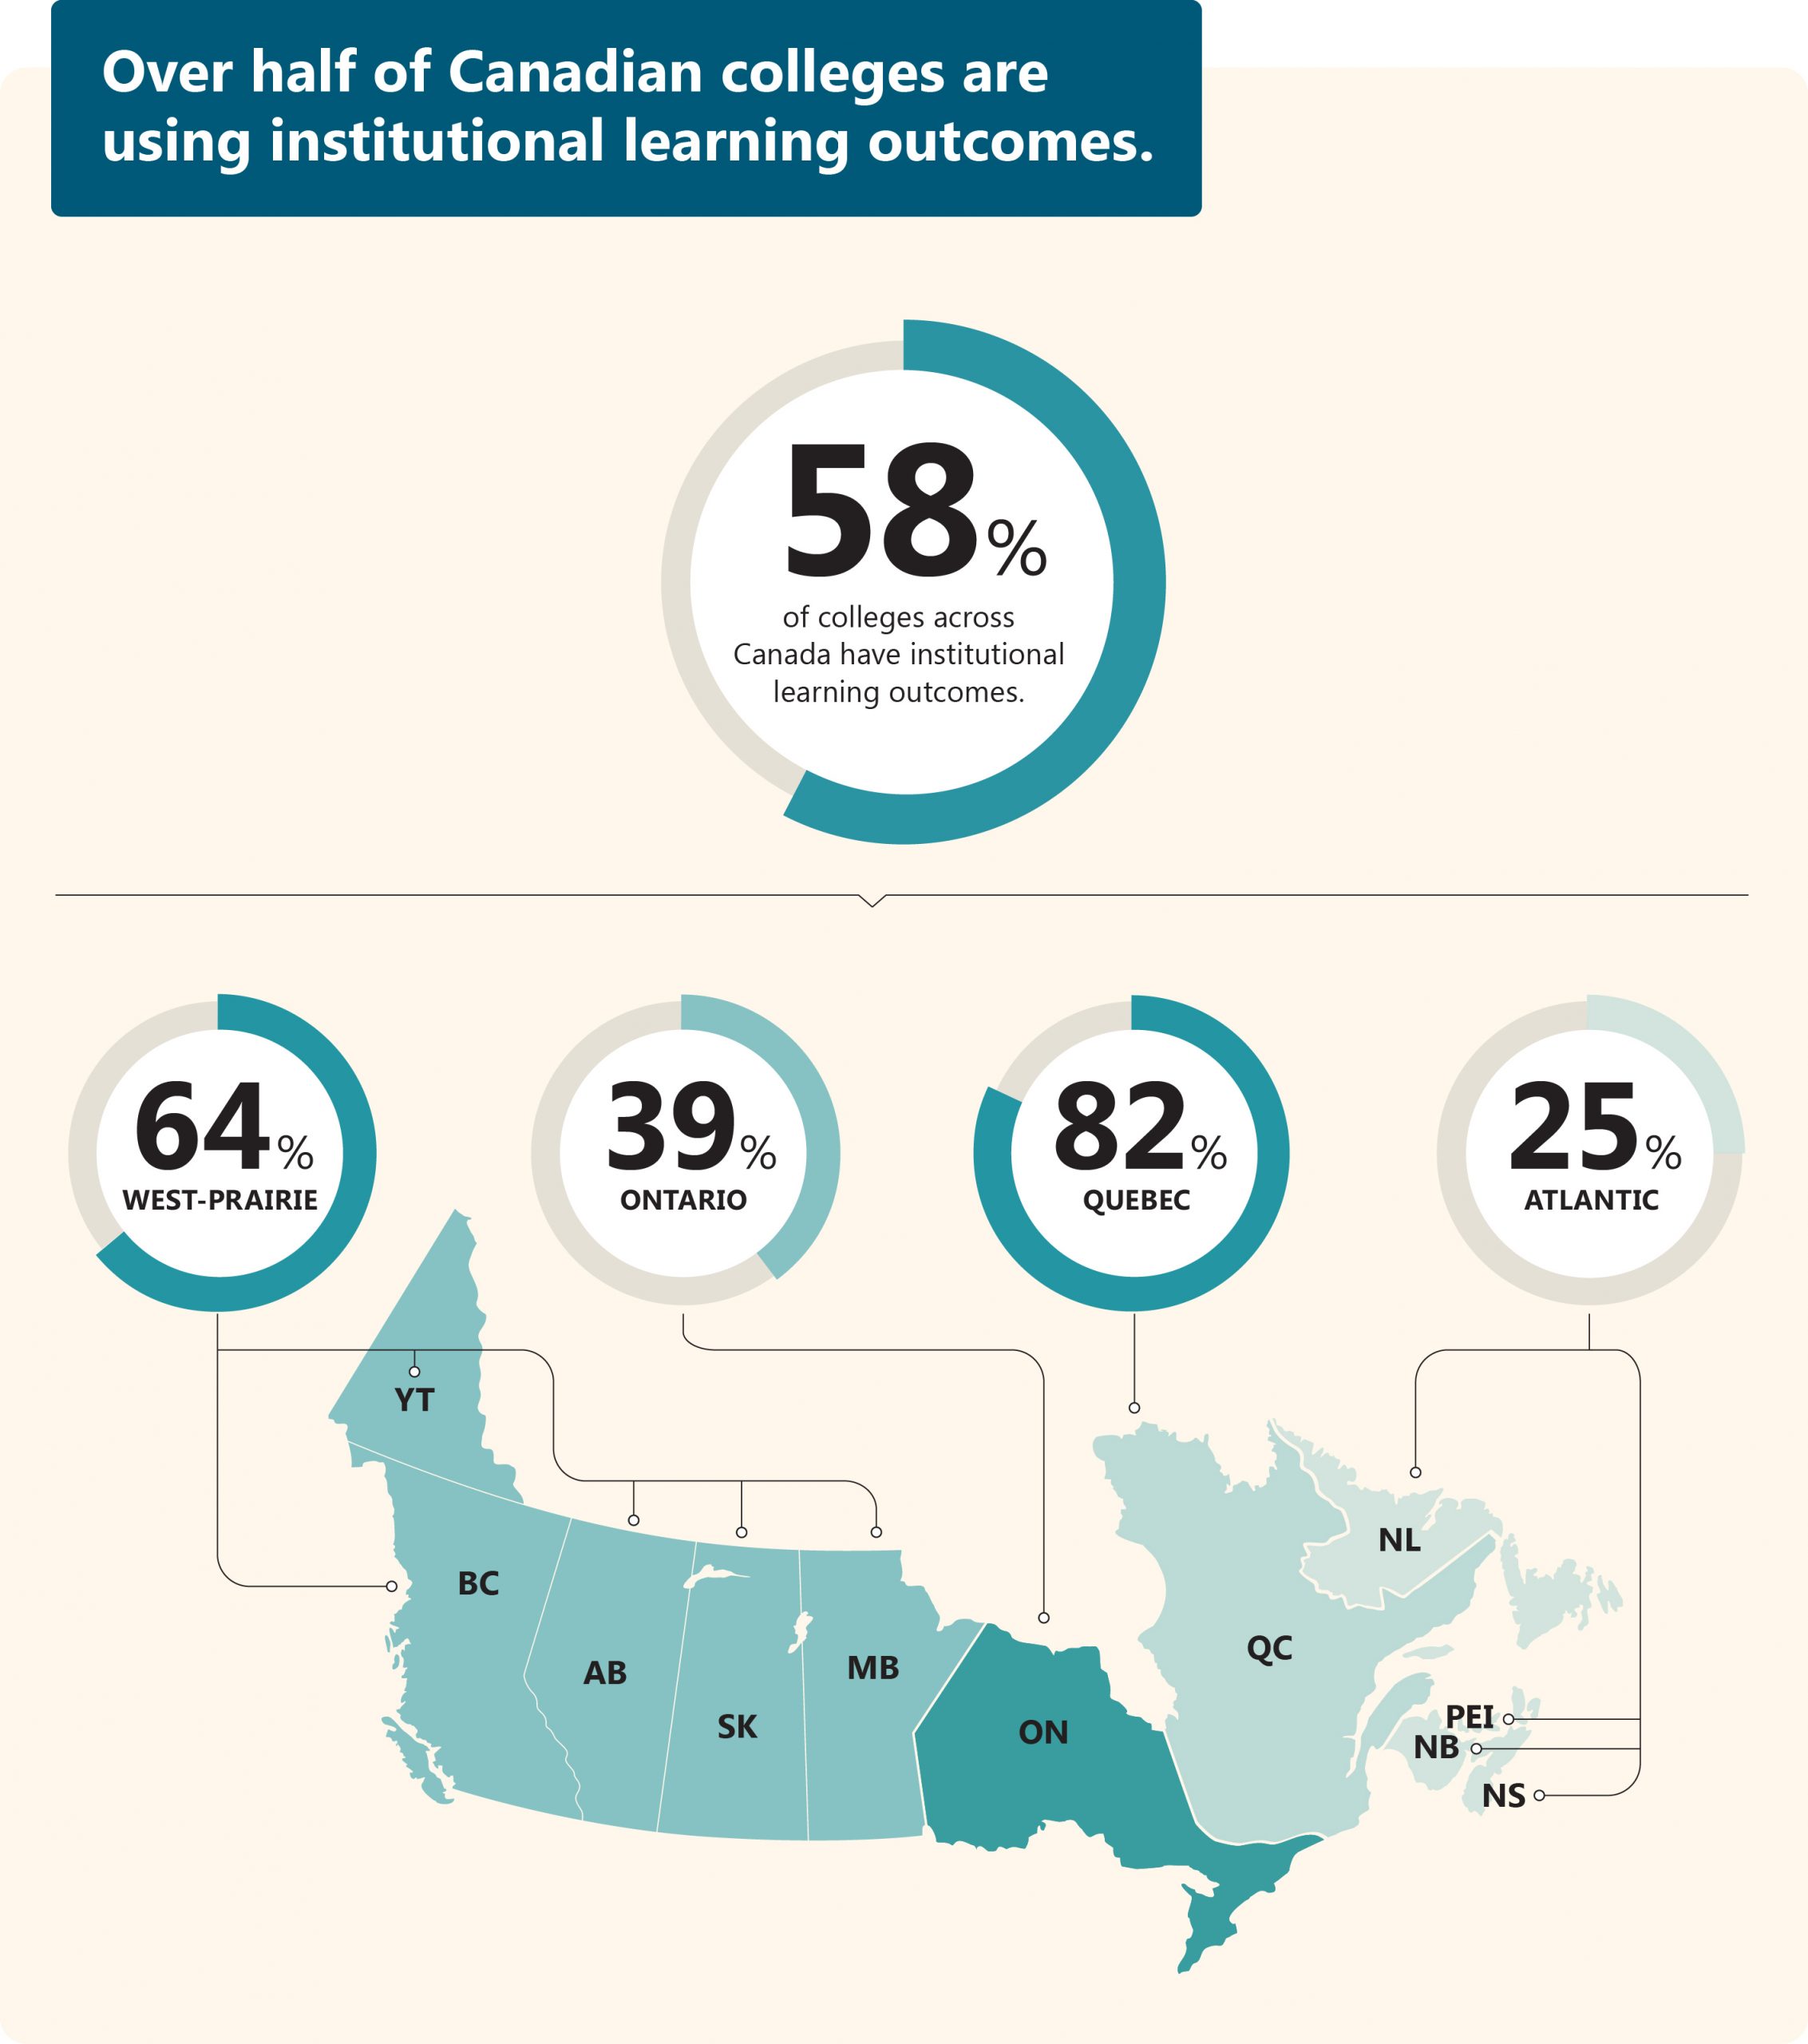 Over half of Canadian colleges are using institutional learning outcomes.